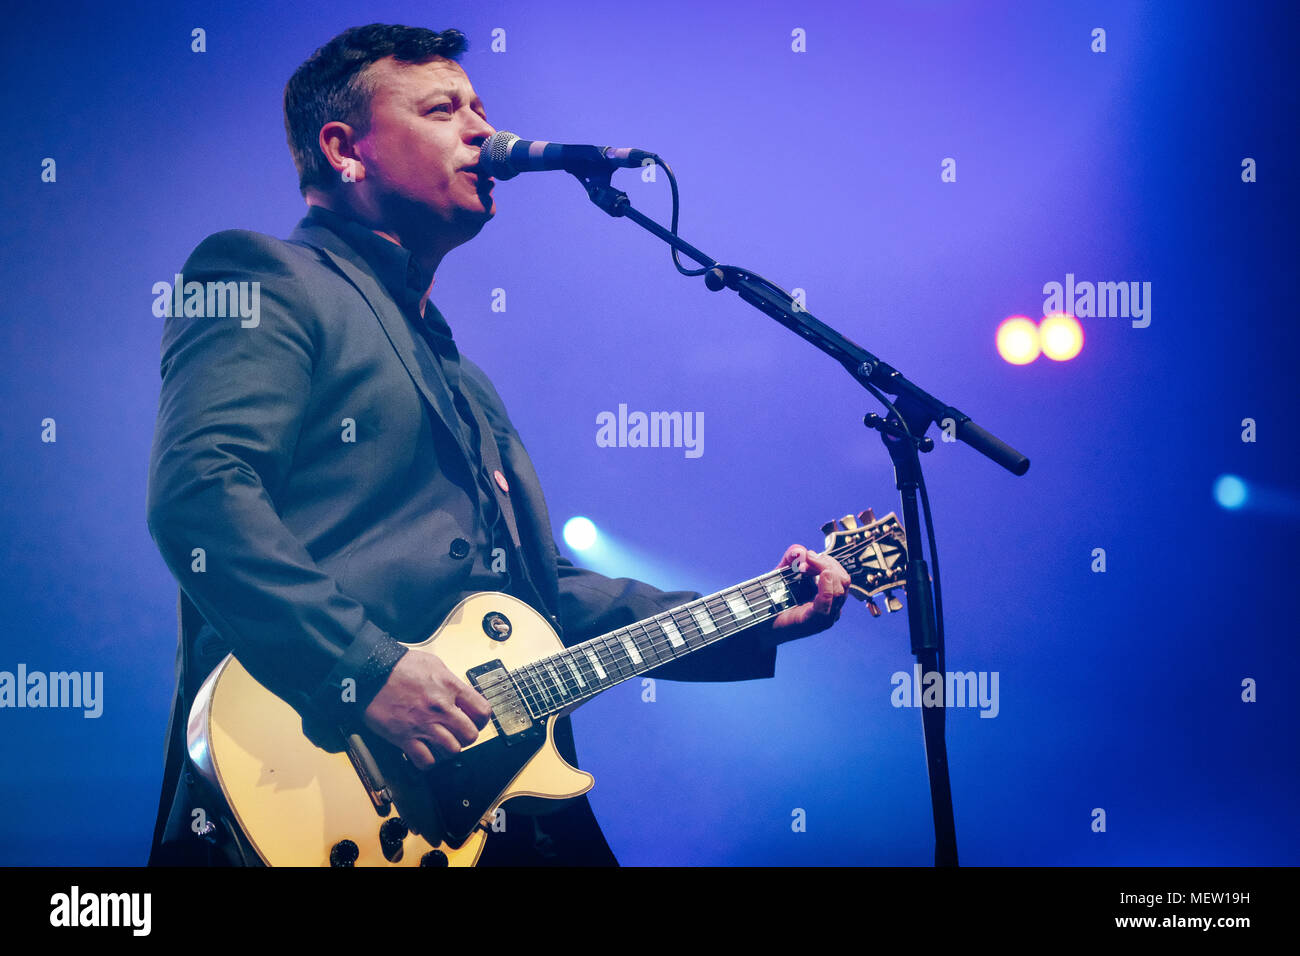 Newcastle, UK. 23rd April, 2018. Welsh rock band Manic Street Preachers perform at Newcastle's MetroRadio Arena on the opening night of their UK tour in support of Resistance Is Futile, their 13th studio album. Credit: Thomas Jackson/Alamy Live News Stock Photo